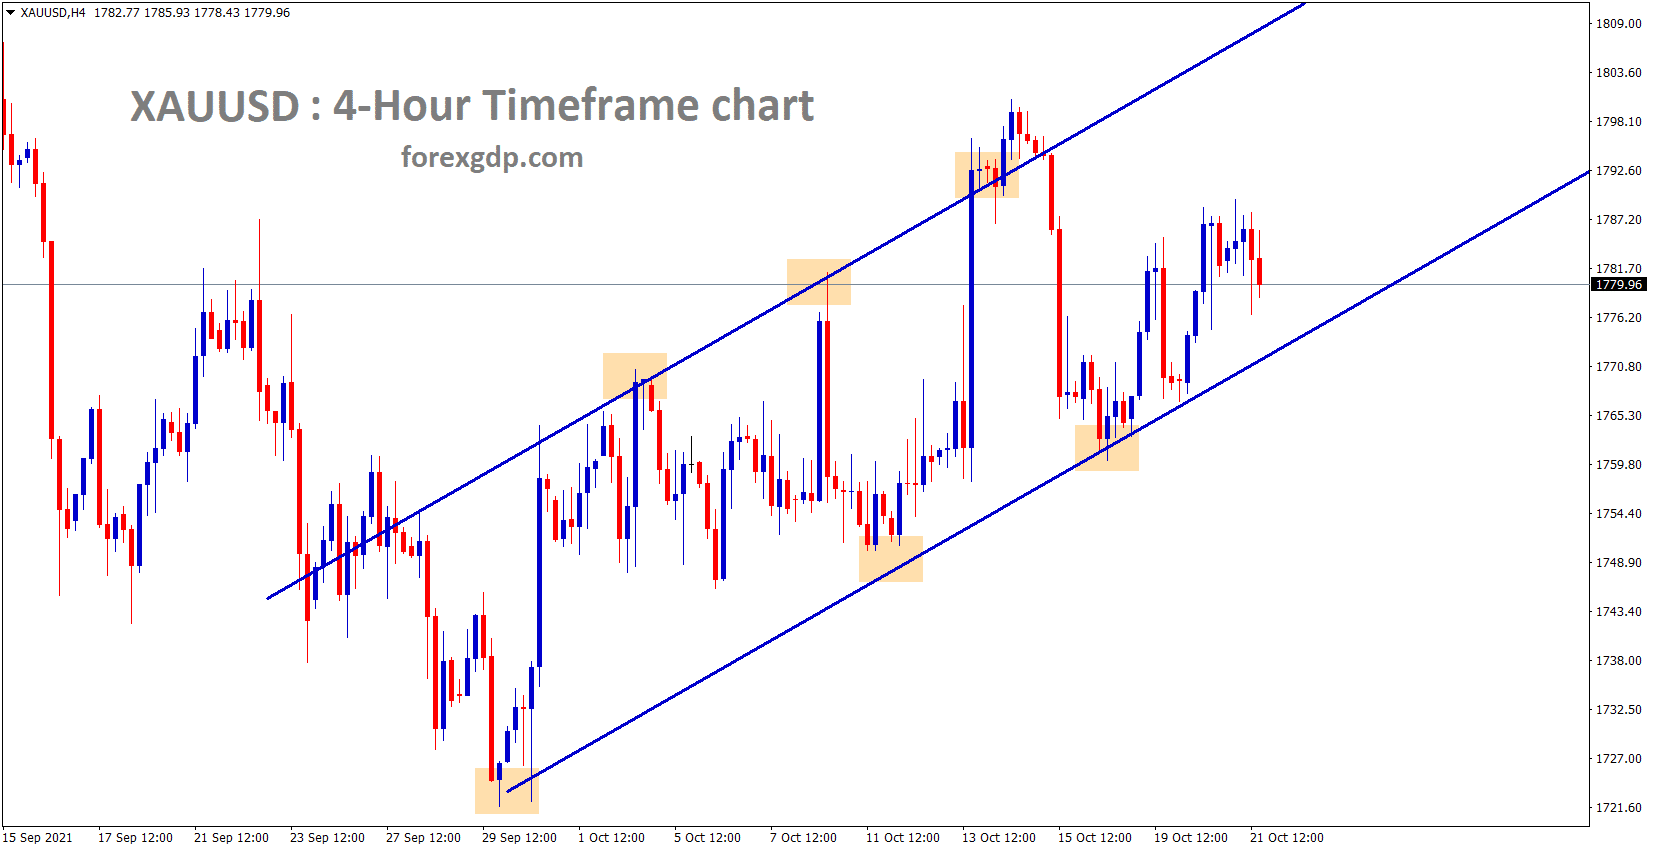 Gold is moving in an Ascending channel range for a long time in the 4 hour timeframe chart